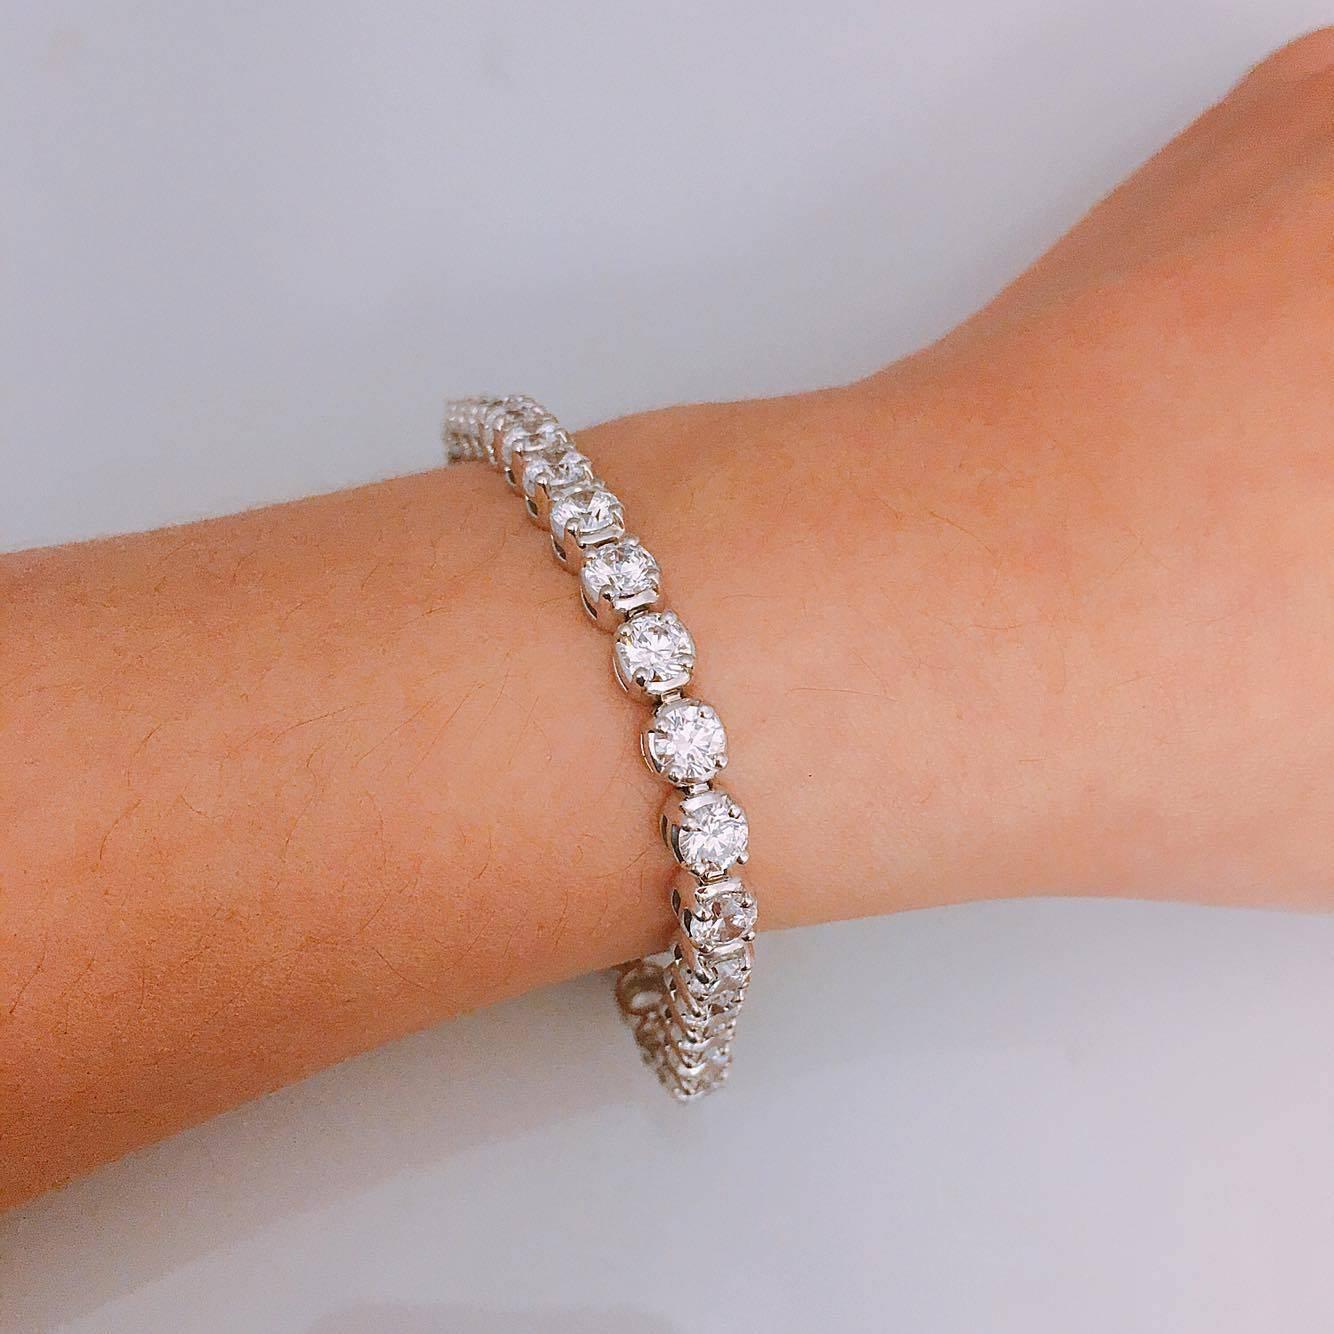 These diamonds were cut with perfection, and are filled with sparkle and life!
This Bracelet was designed and manufactured by Emilio!

Total carat: 12 carats